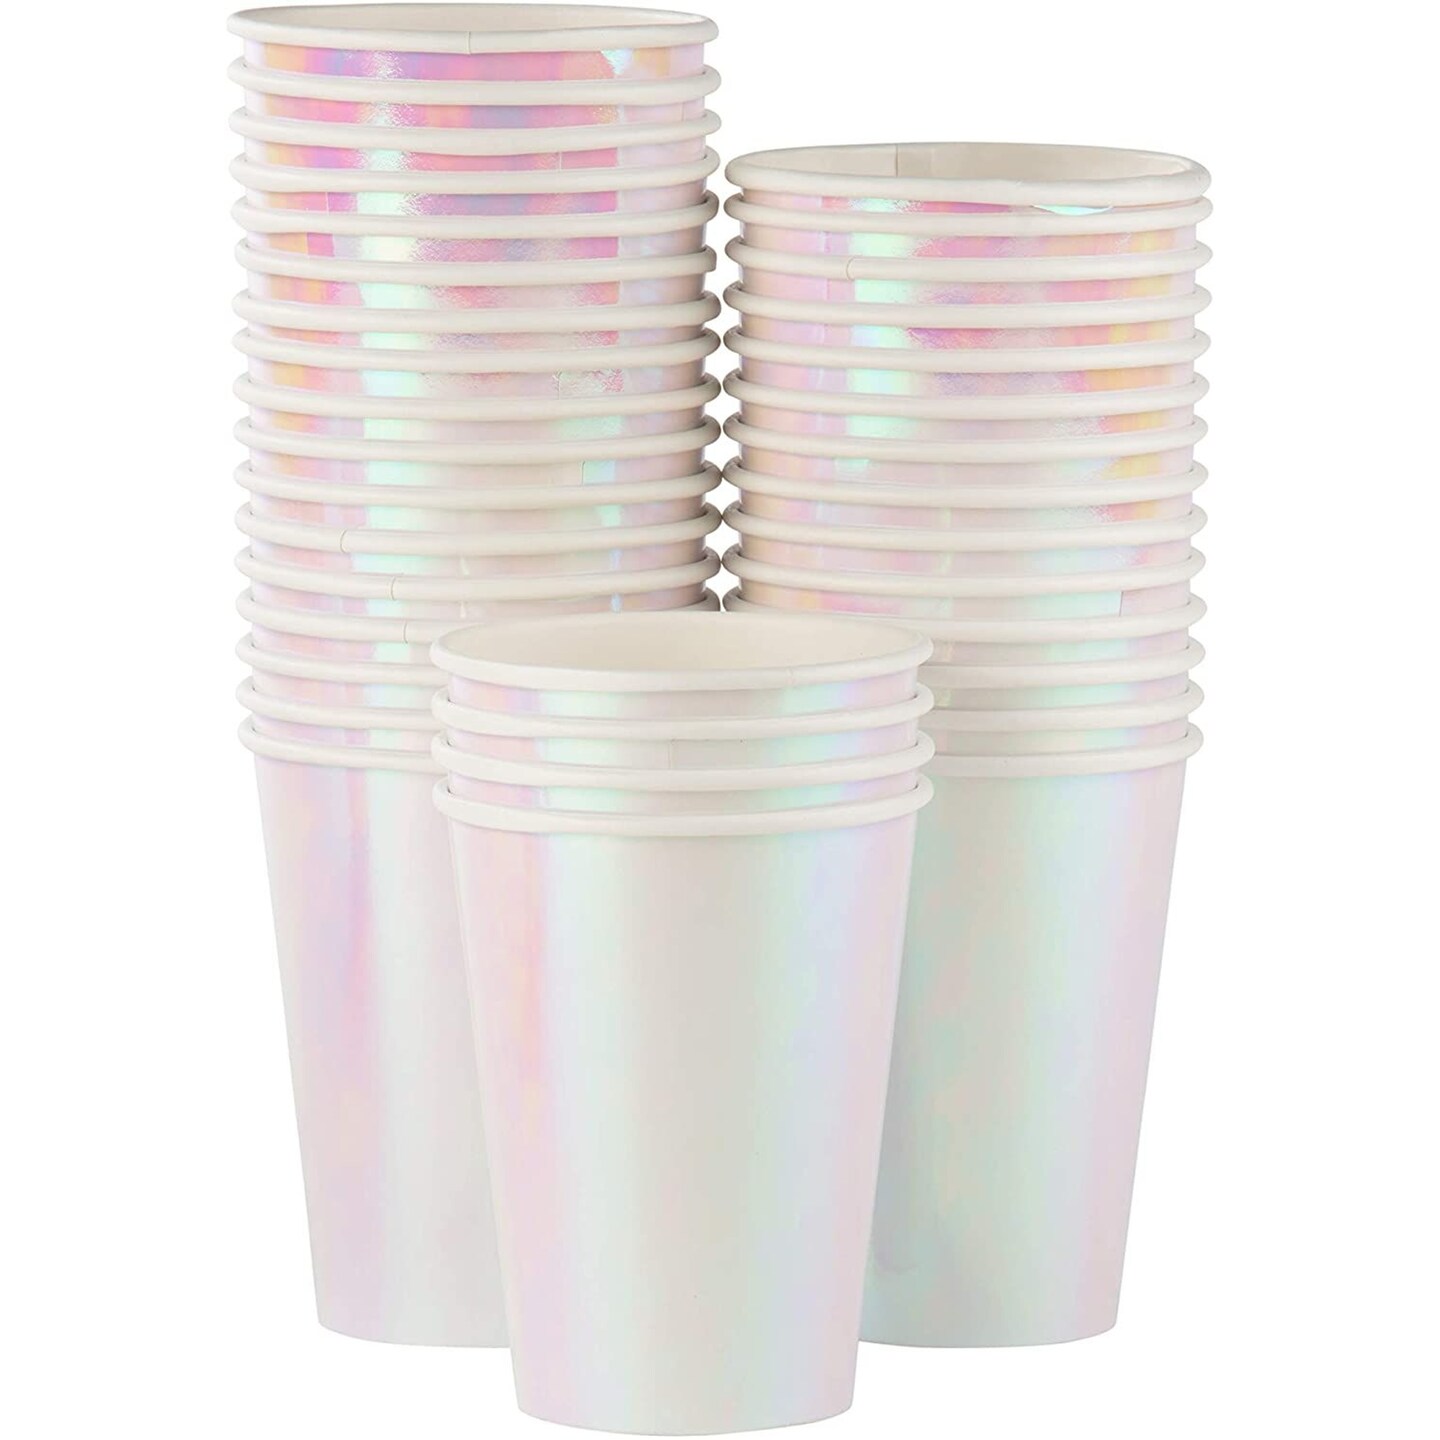 36-Pack Iridescent Party Supplies - 12 oz Iridescent Paper Cups, Disposable Party Cups for Hold and Cold Drinks